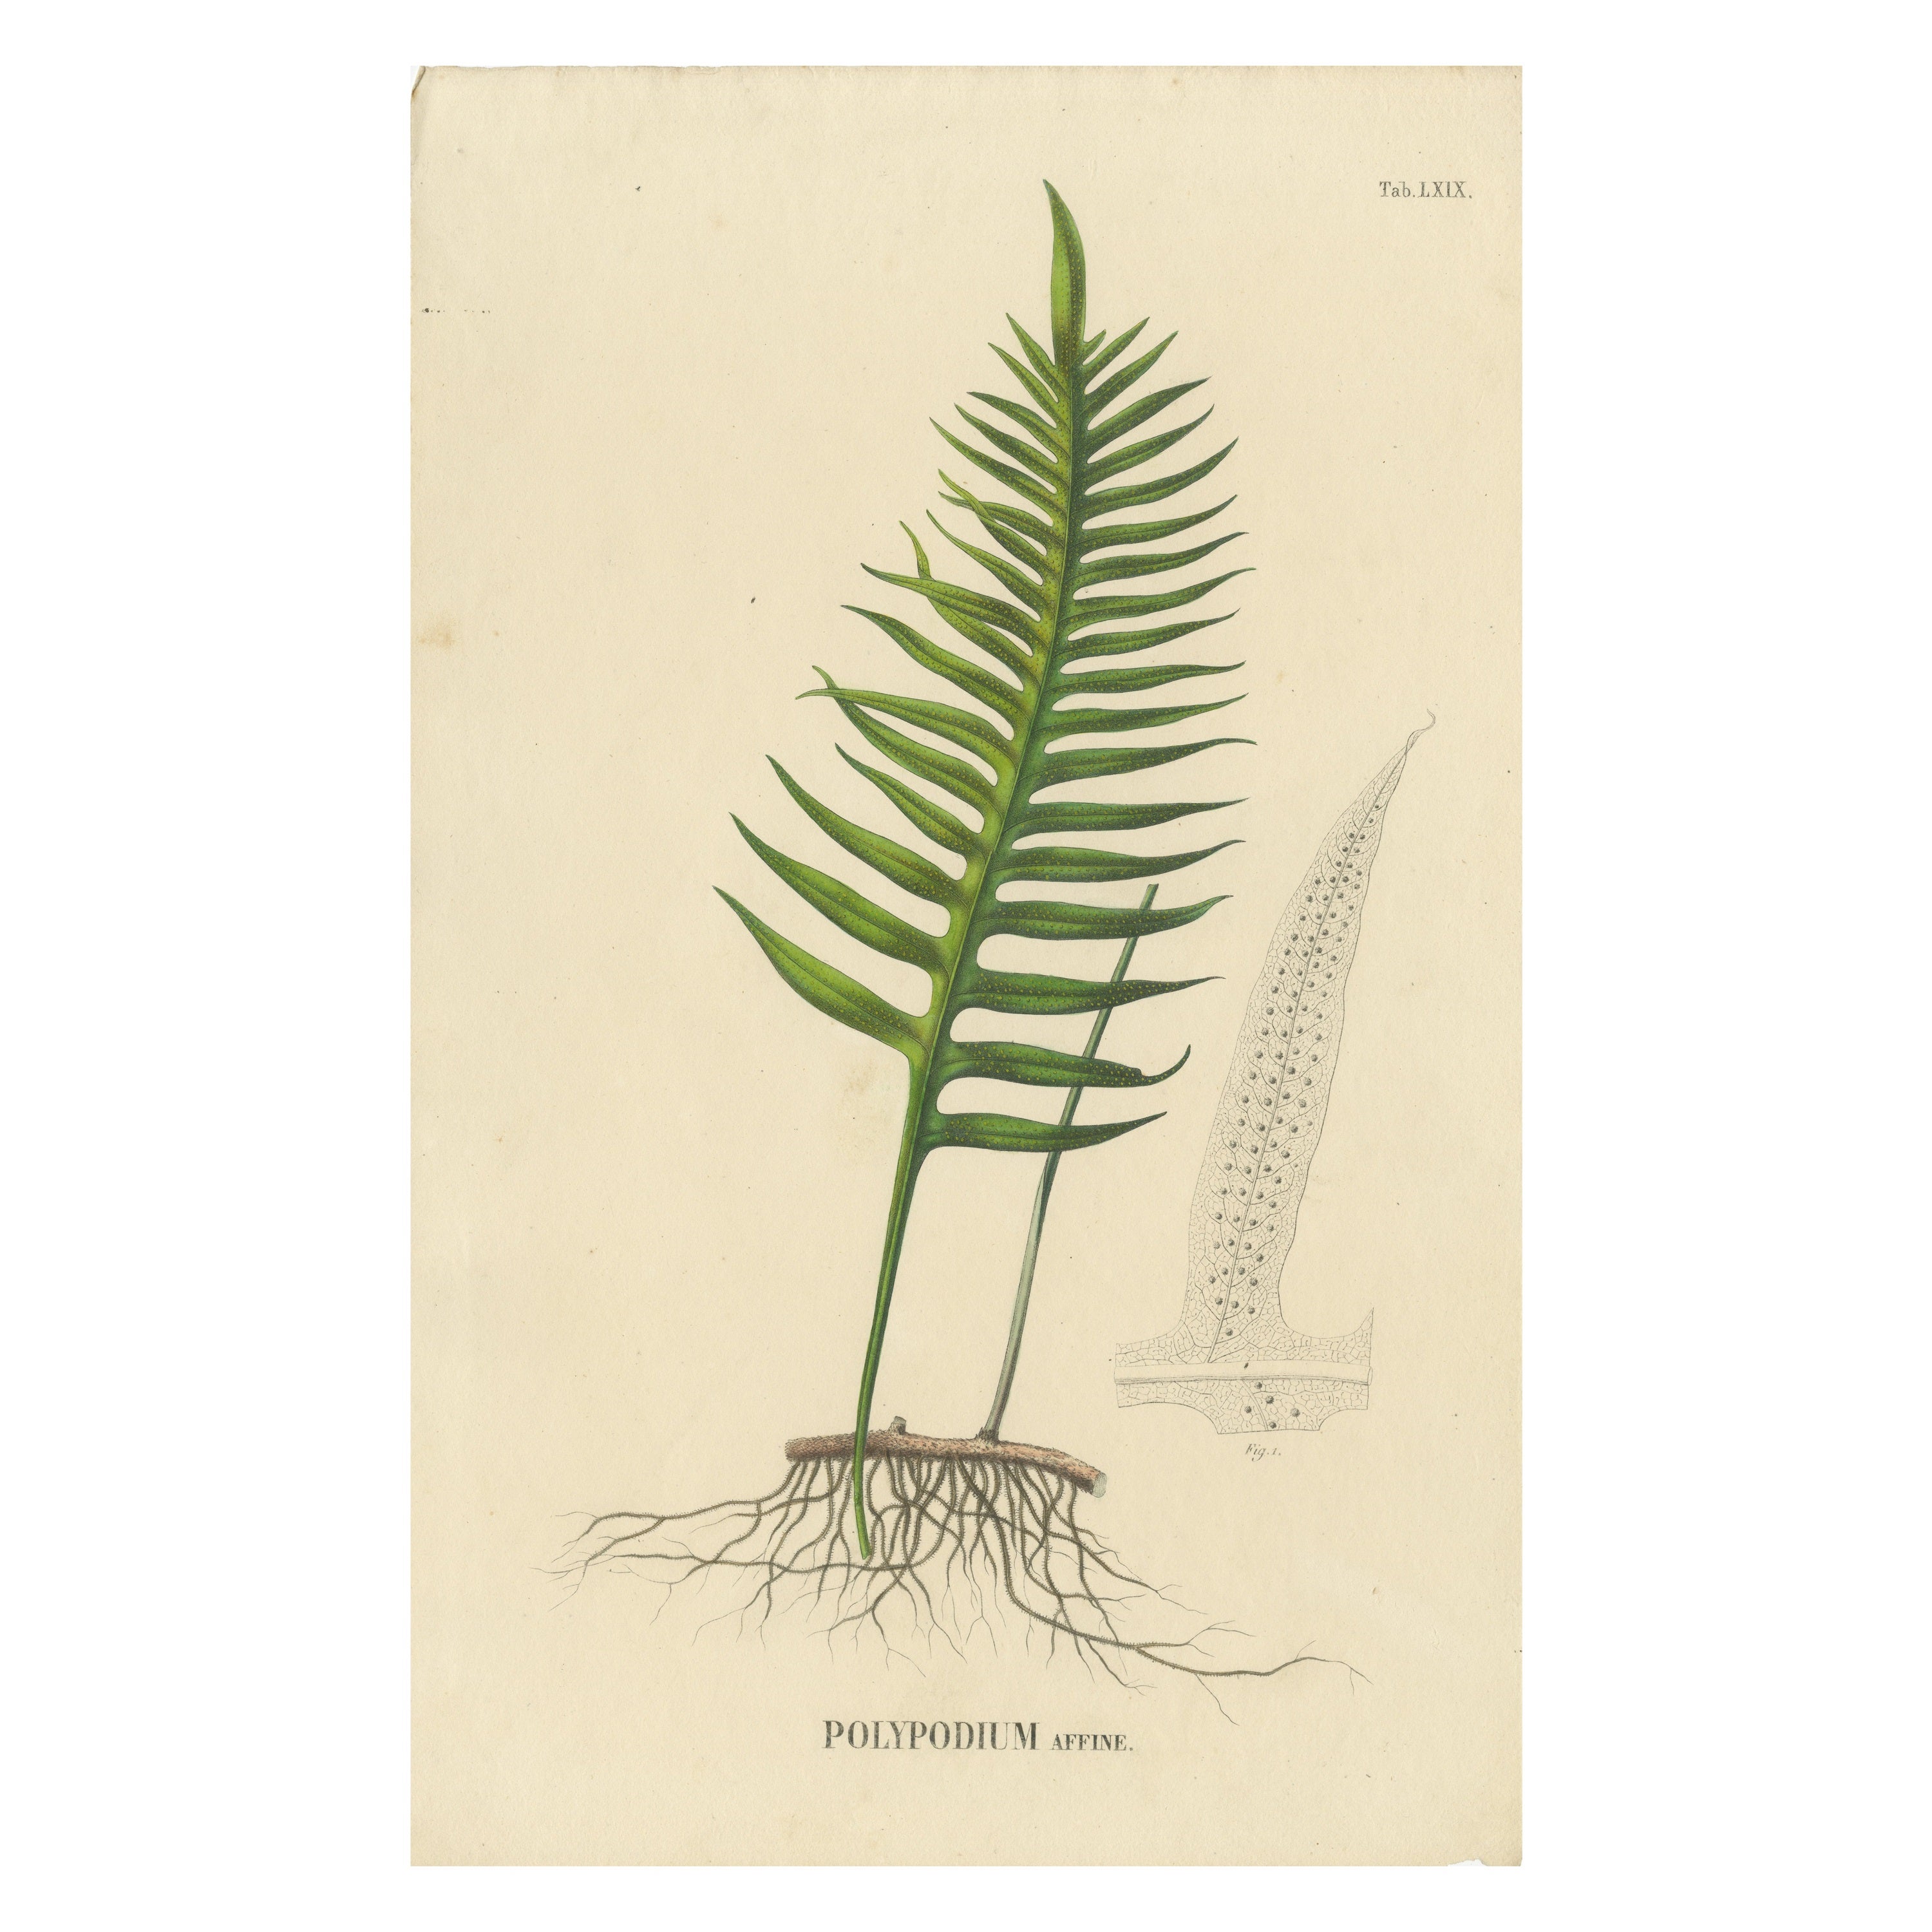 Rare Handcolored Lithograph of Ferns of Indonesia 'Polypodium', 1829 